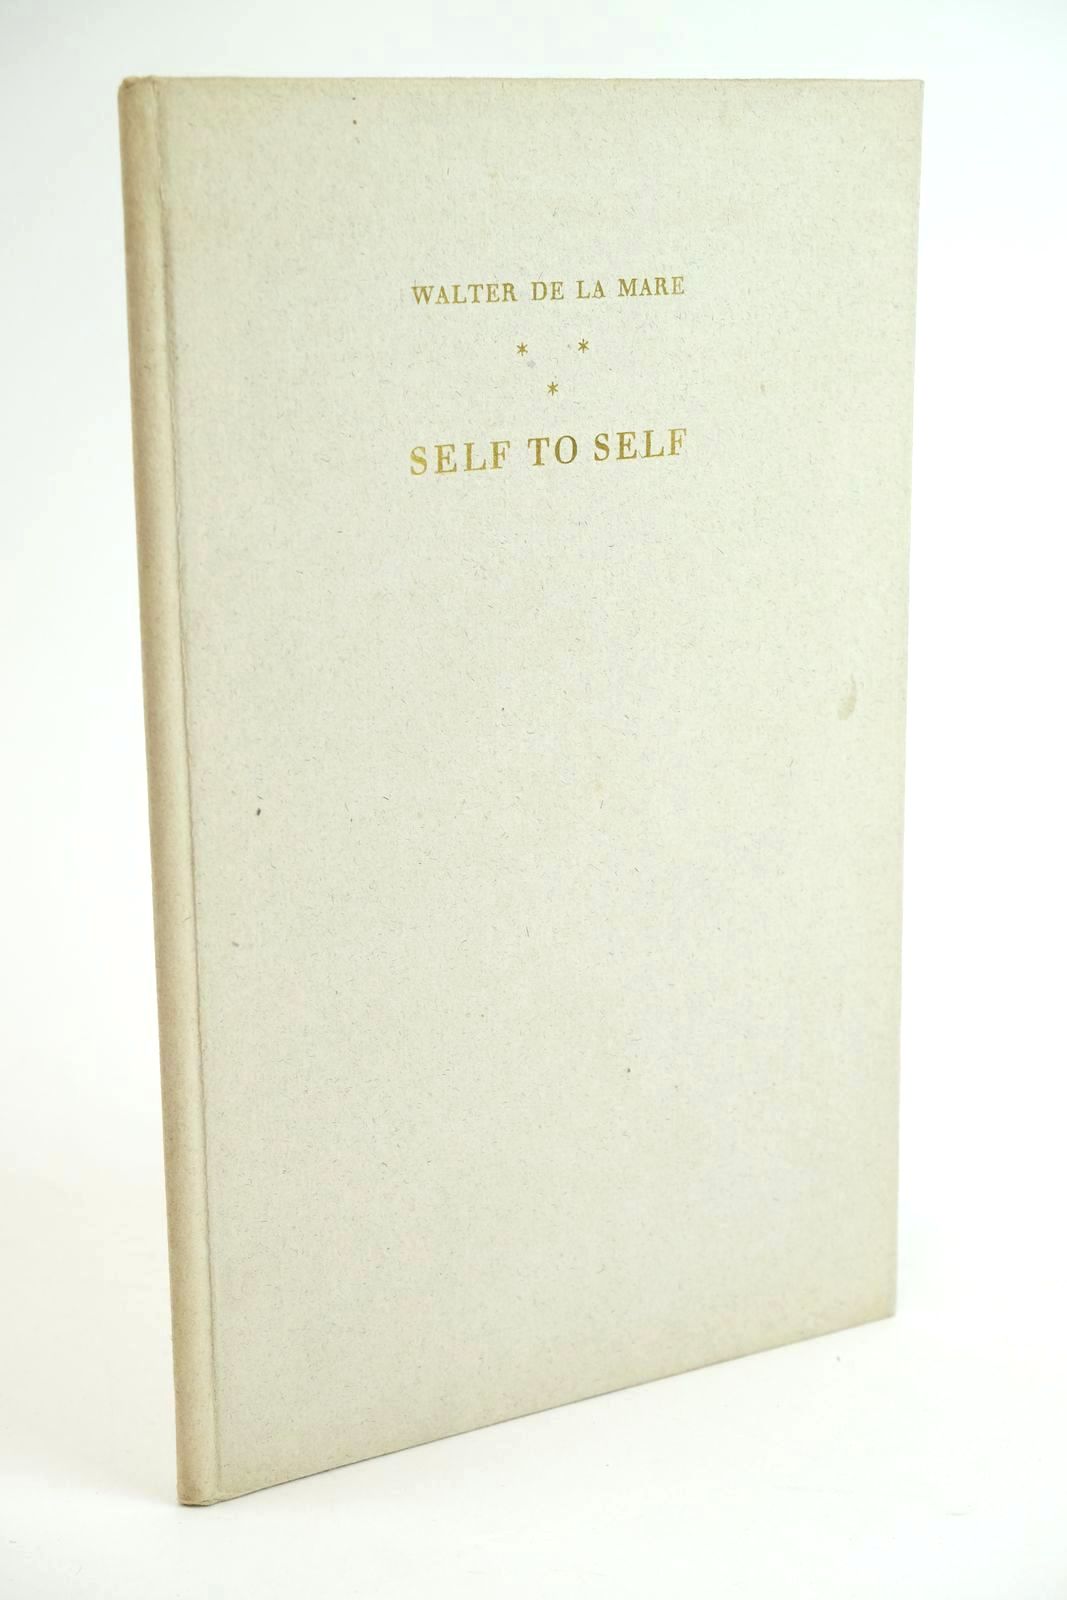 Photo of SELF TO SELF written by De La Mare, Walter illustrated by Hughes-Stanton, Blair published by Faber and Gwyer, Ltd. (STOCK CODE: 1323473)  for sale by Stella & Rose's Books